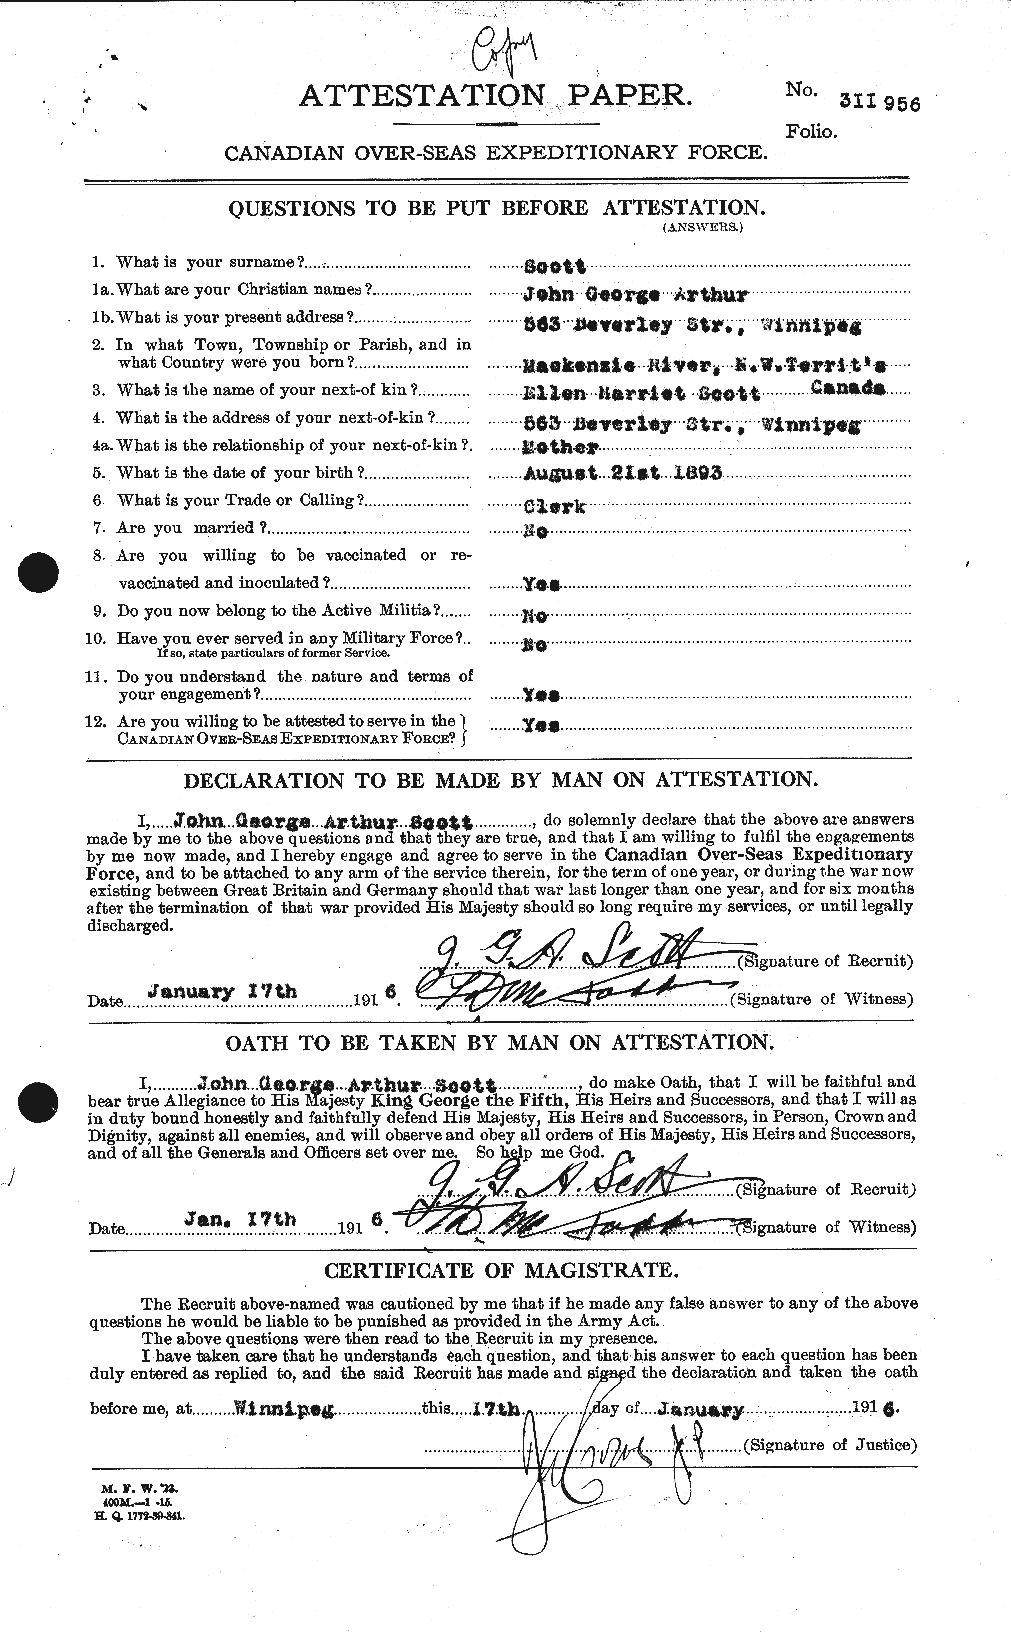 Personnel Records of the First World War - CEF 084626a